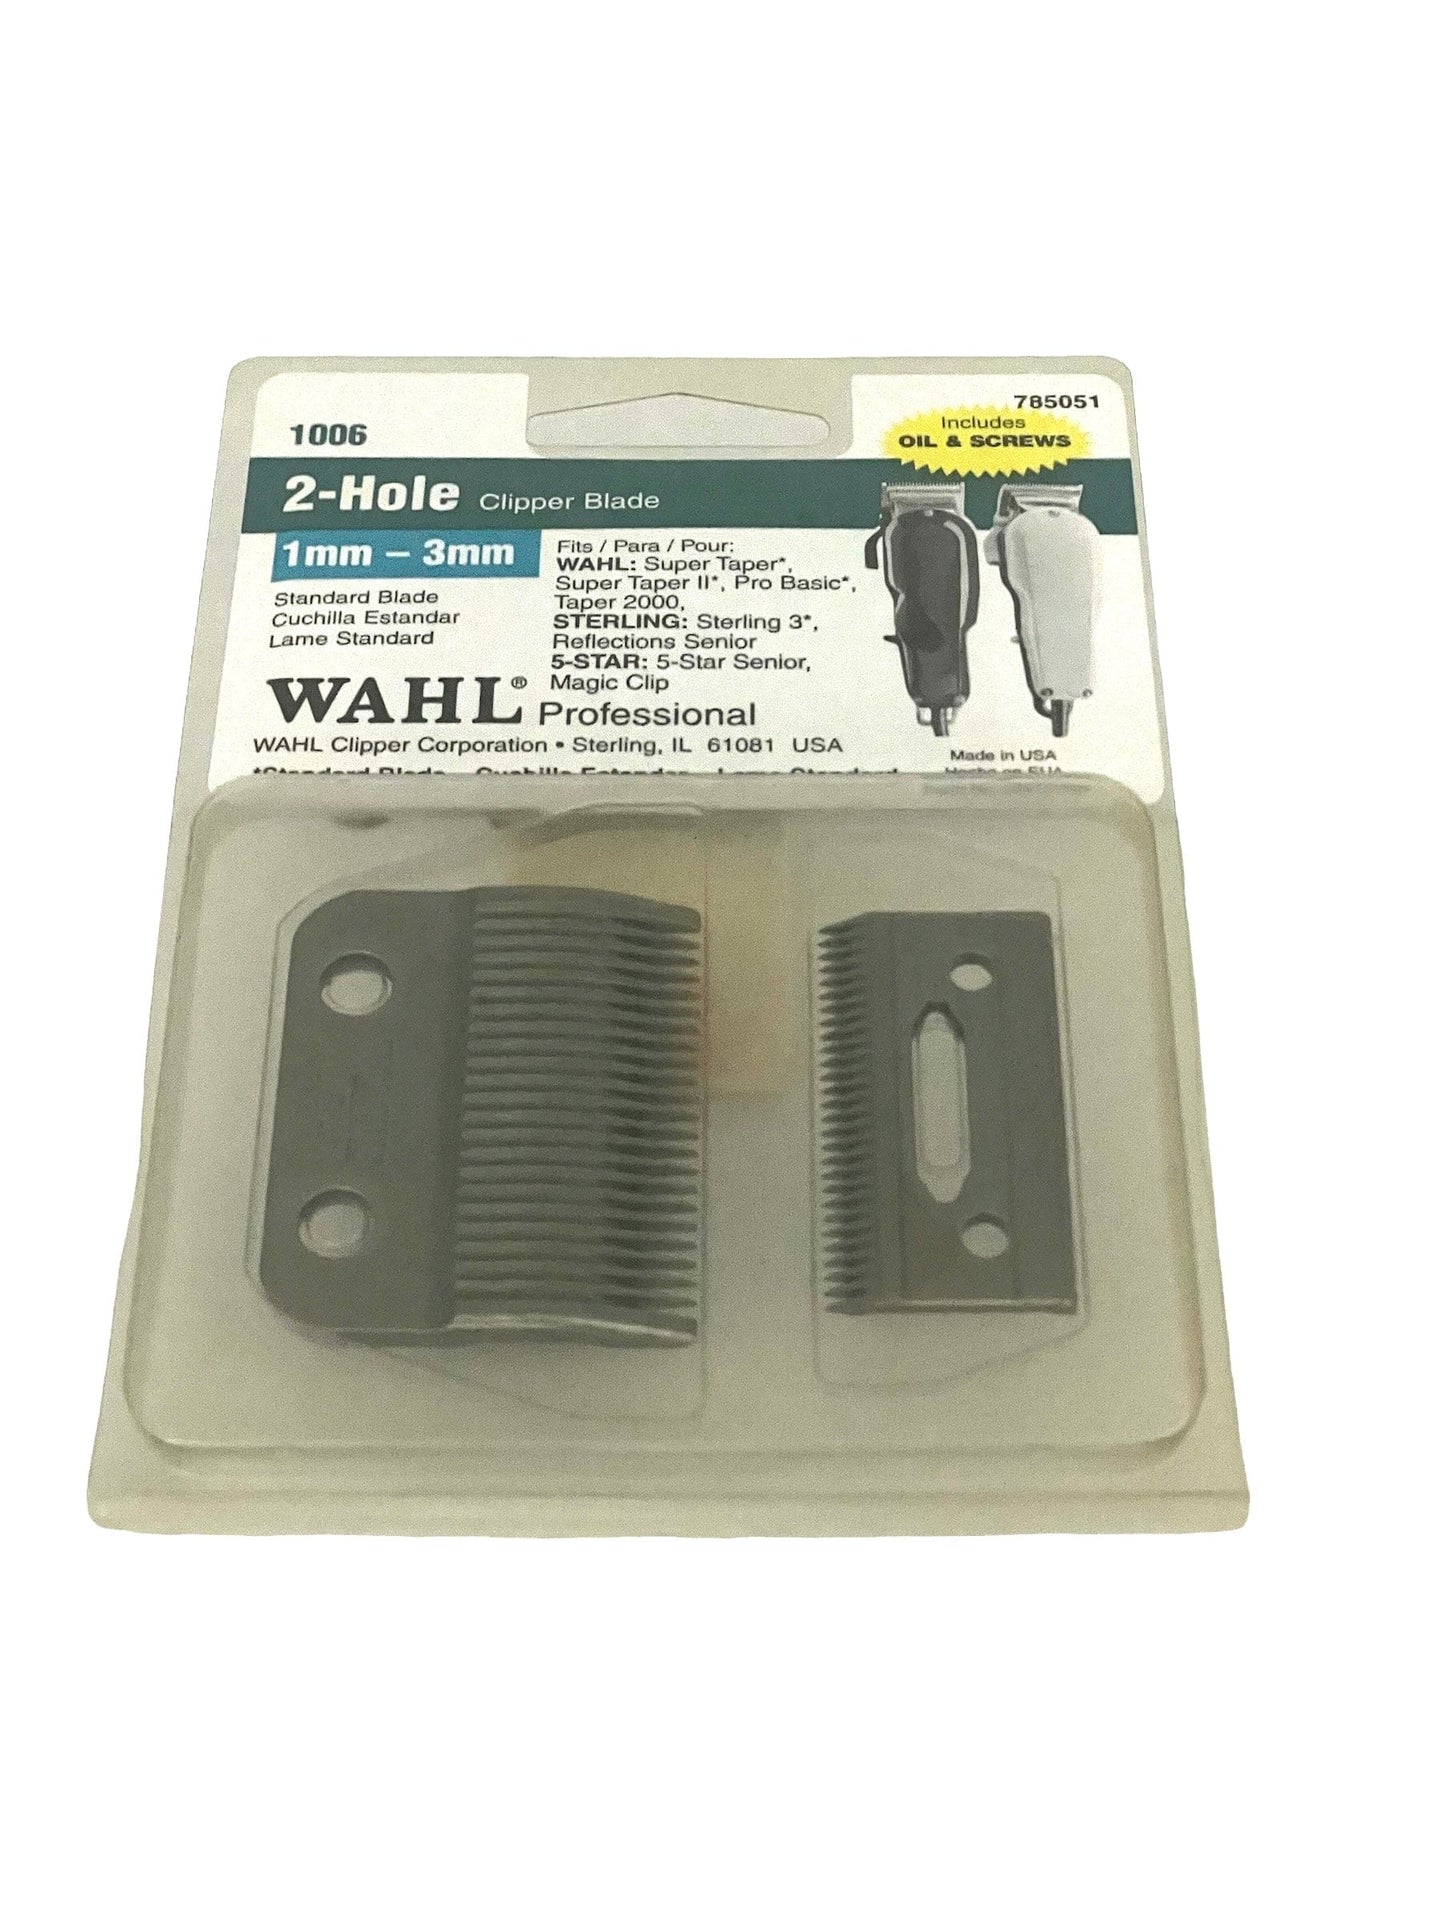 Wahl 2 Hole Clipper Replacement Blade Fits Many Clippers Razors & Razor Blades